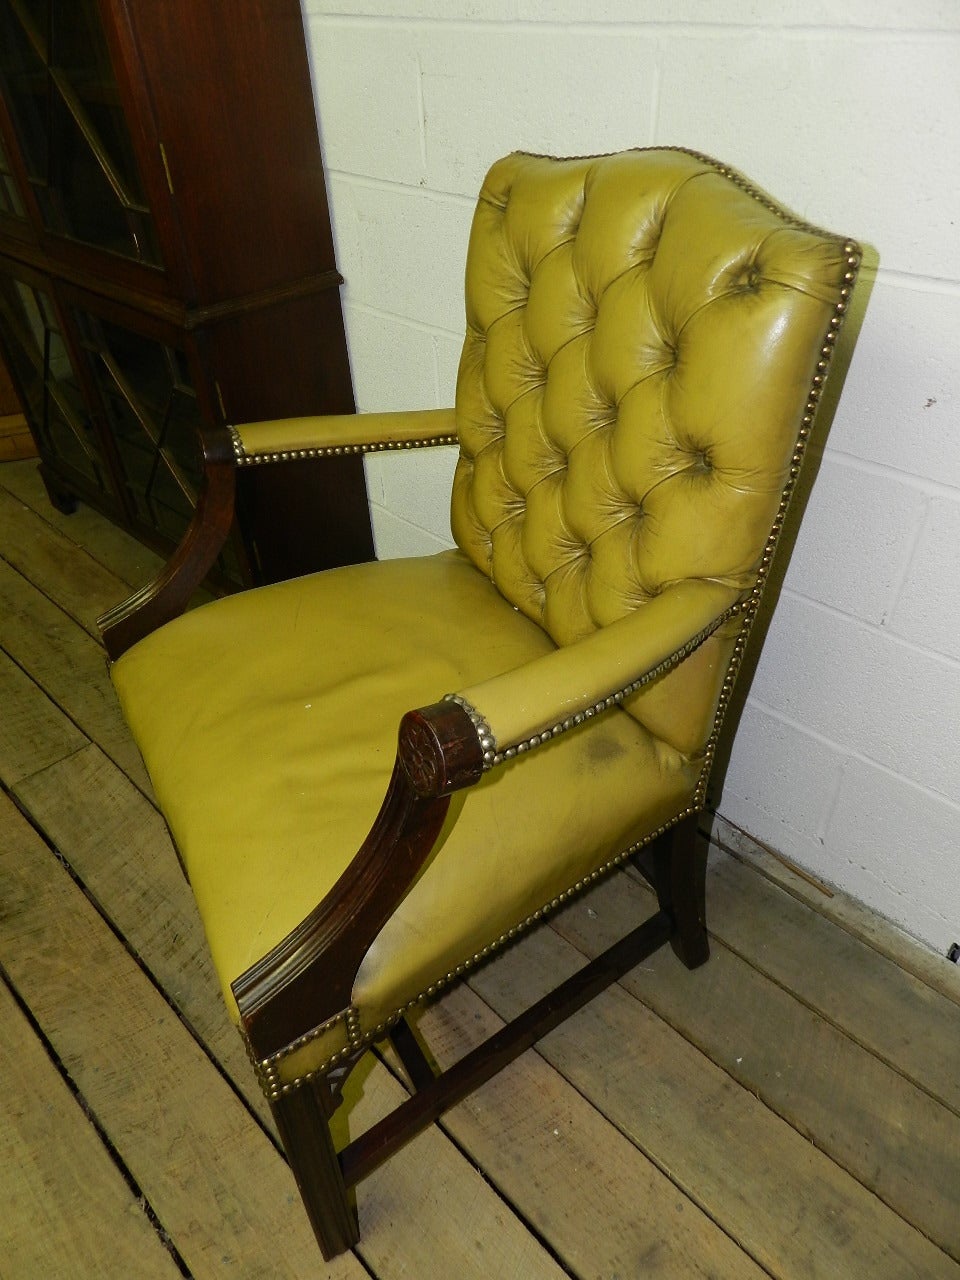 Great Britain (UK) Mahogany and Leather Desk Chair